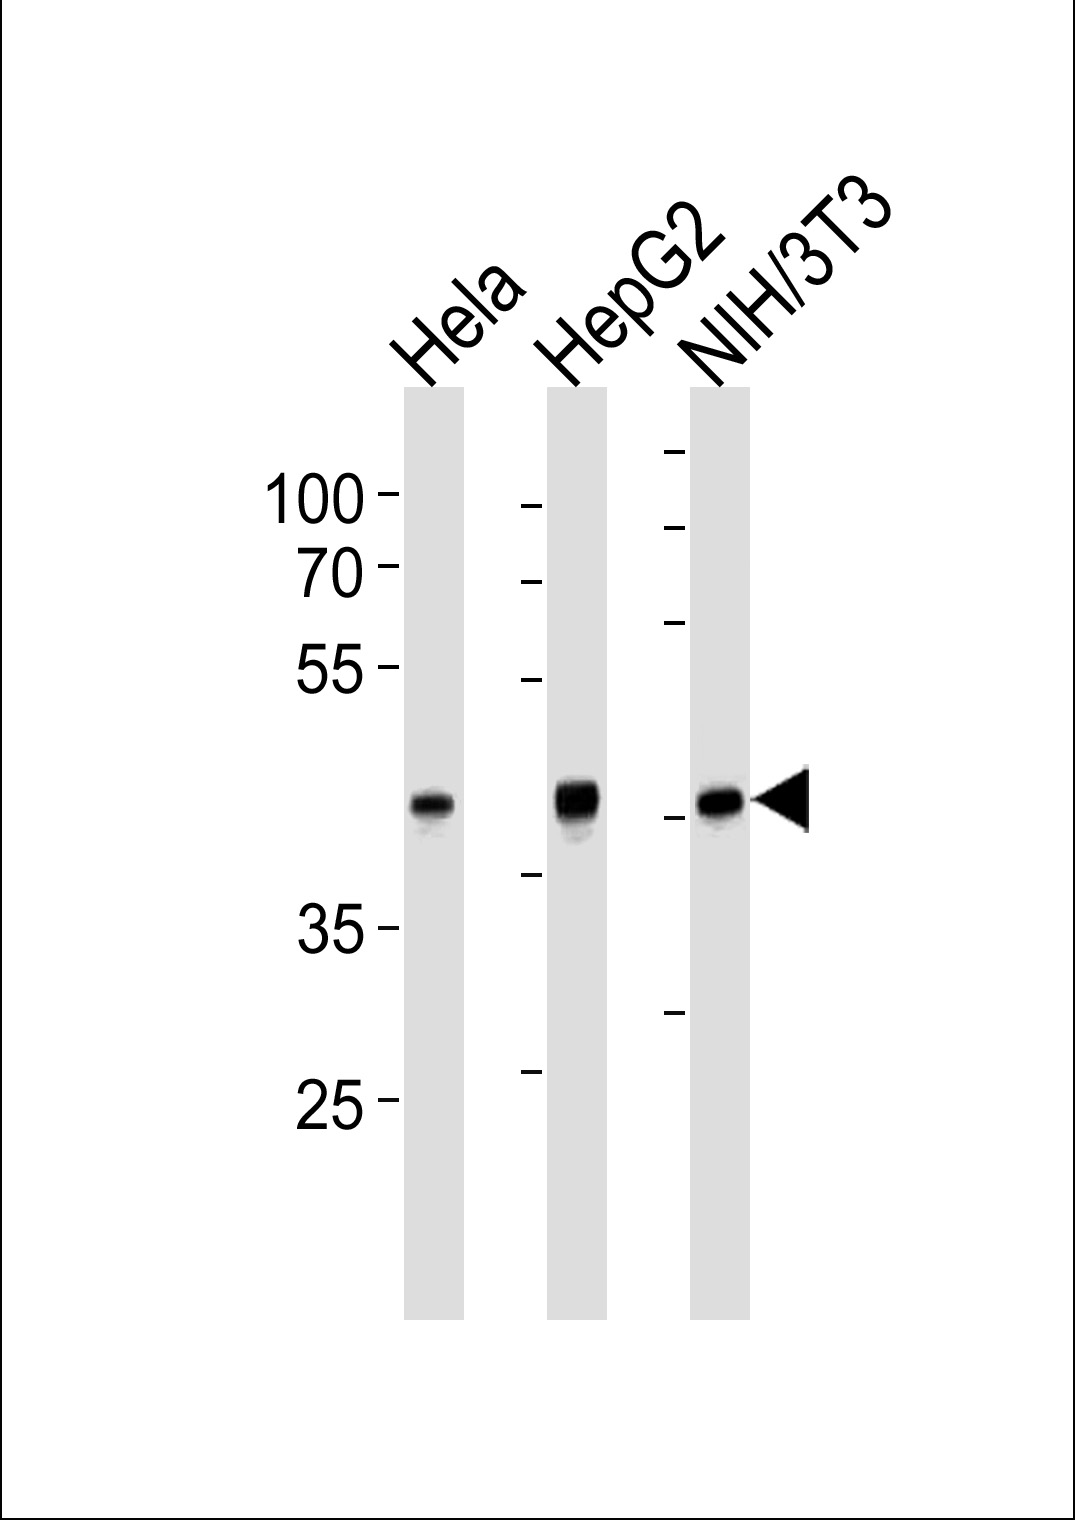 TBP Antibody (Cat. #AM2196b) western blot analysis in Hela,HepG2,mouse NIH/3T3 cell line lysates (35?g/lane).This demonstrates the TBP antibody detected the TBP protein (arrow).